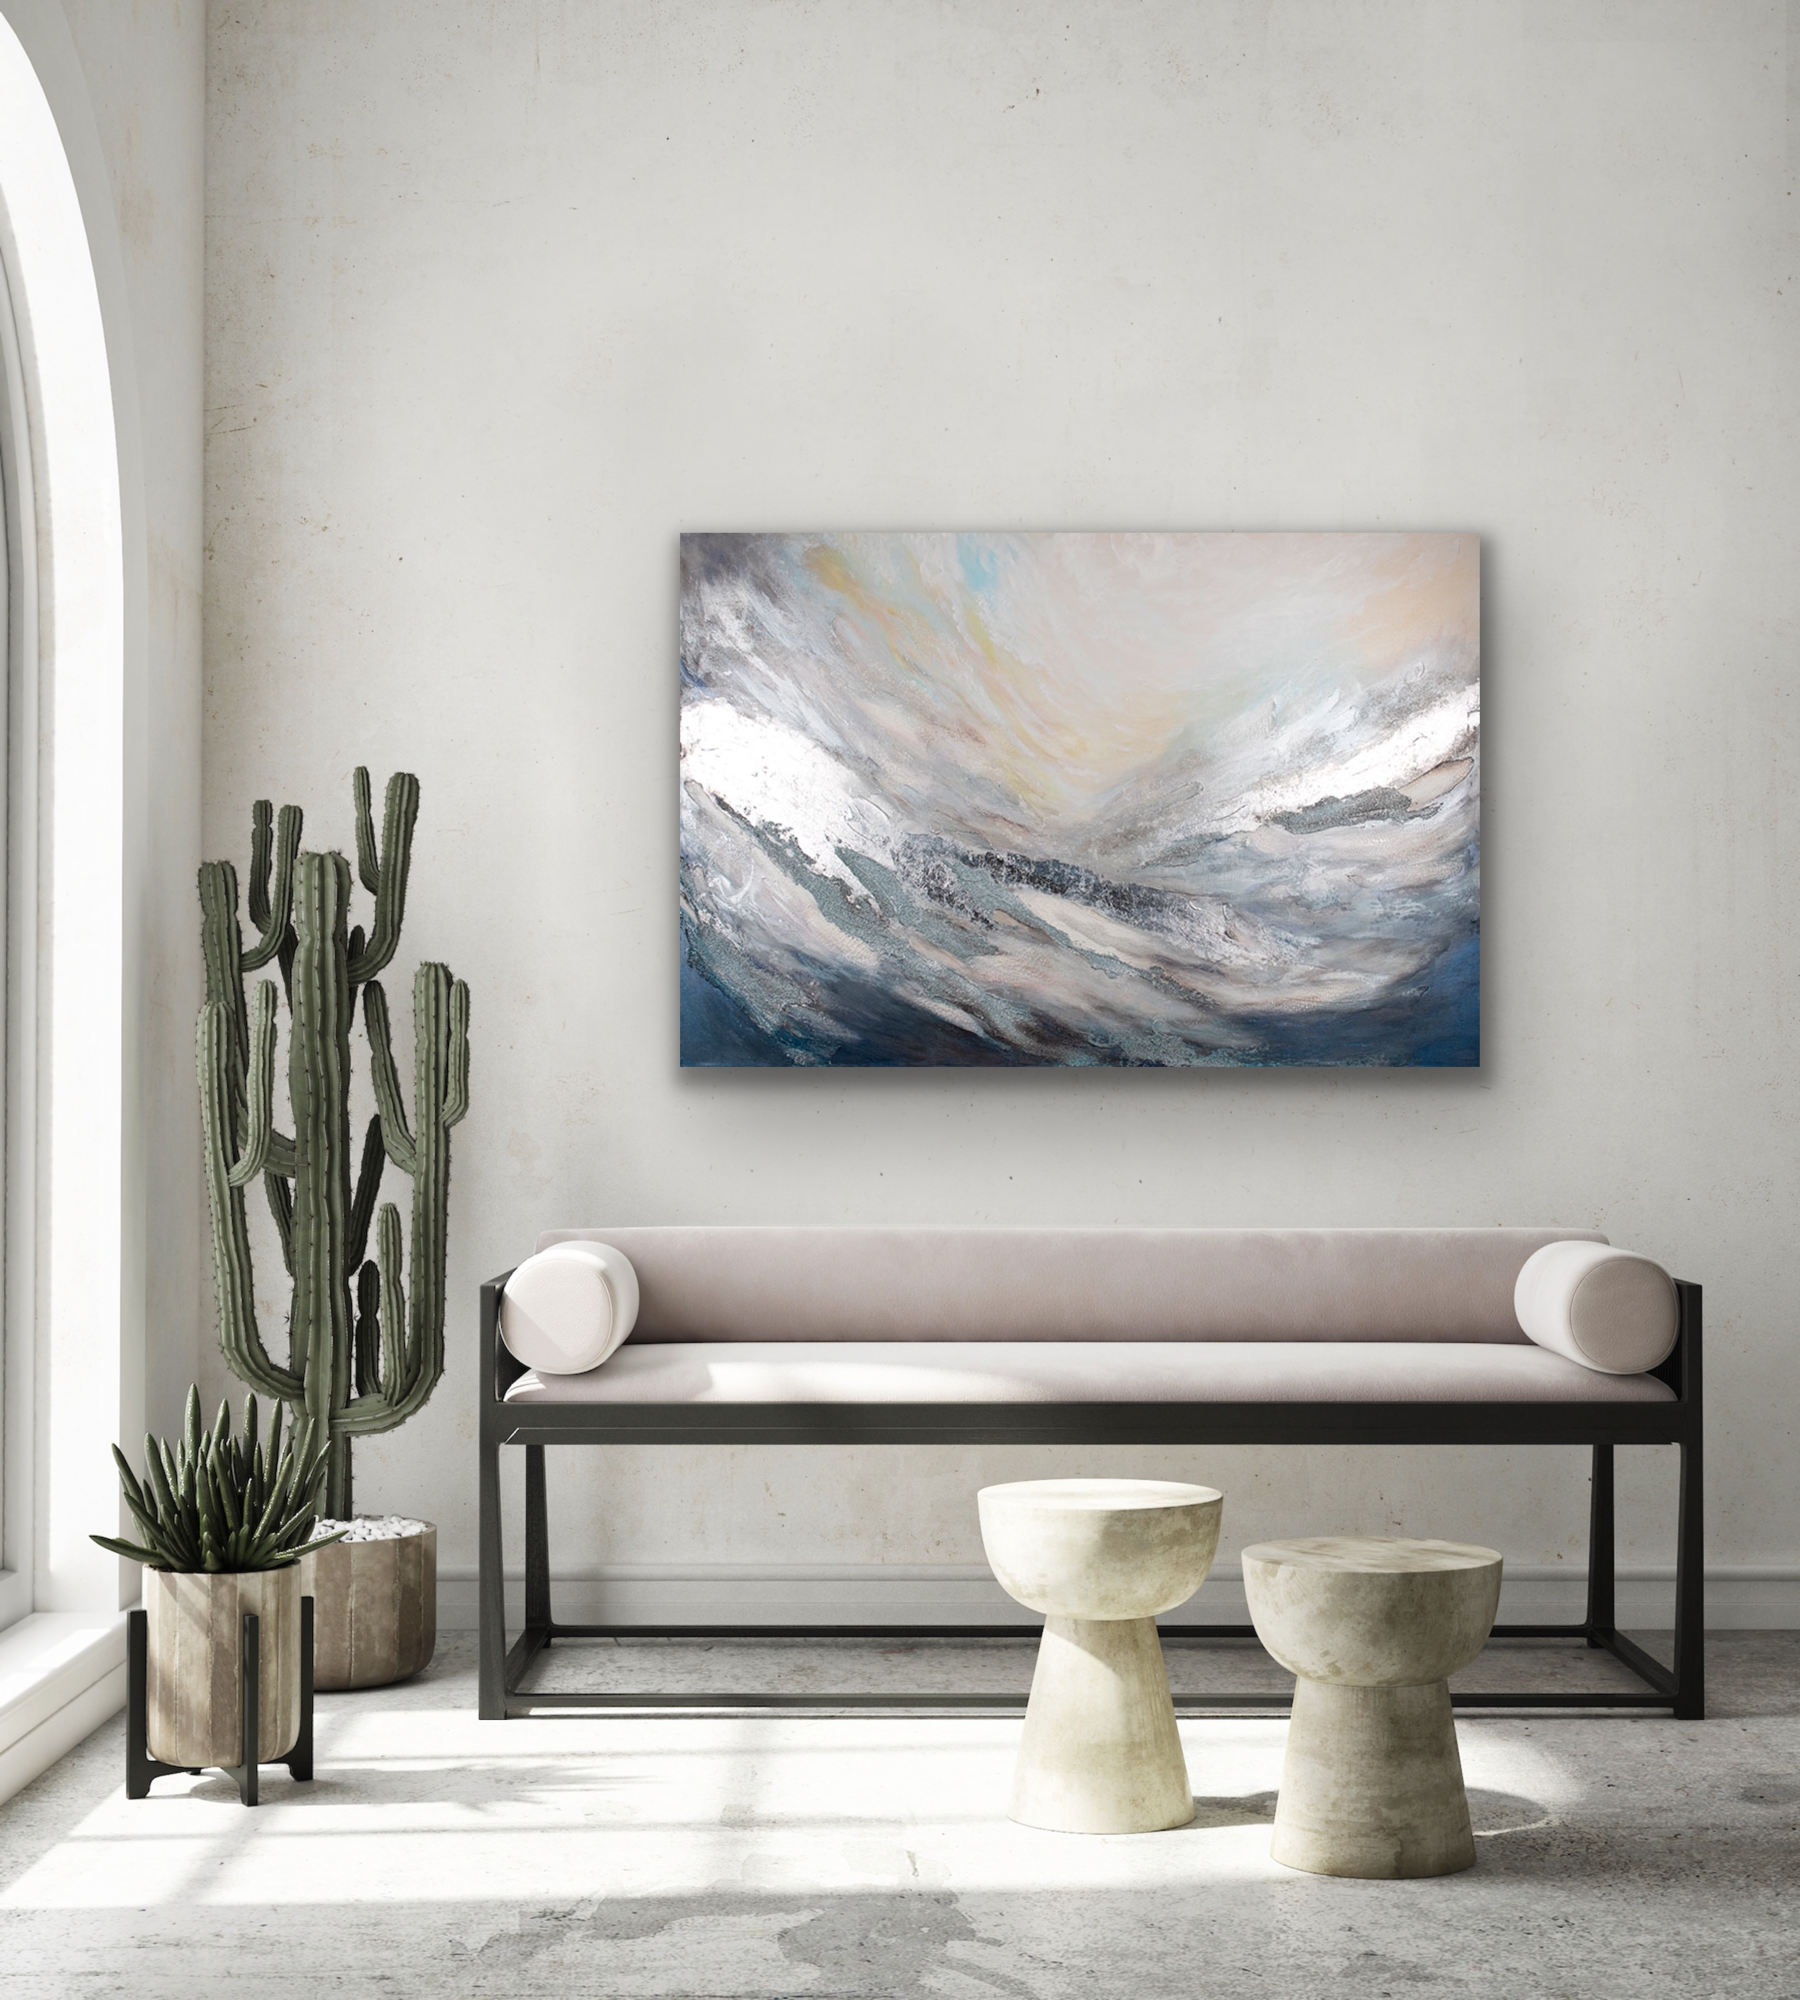 The attractive art piece will look great in your entrance way and comes in five different canvas print sizes to fit your wall perfectly.